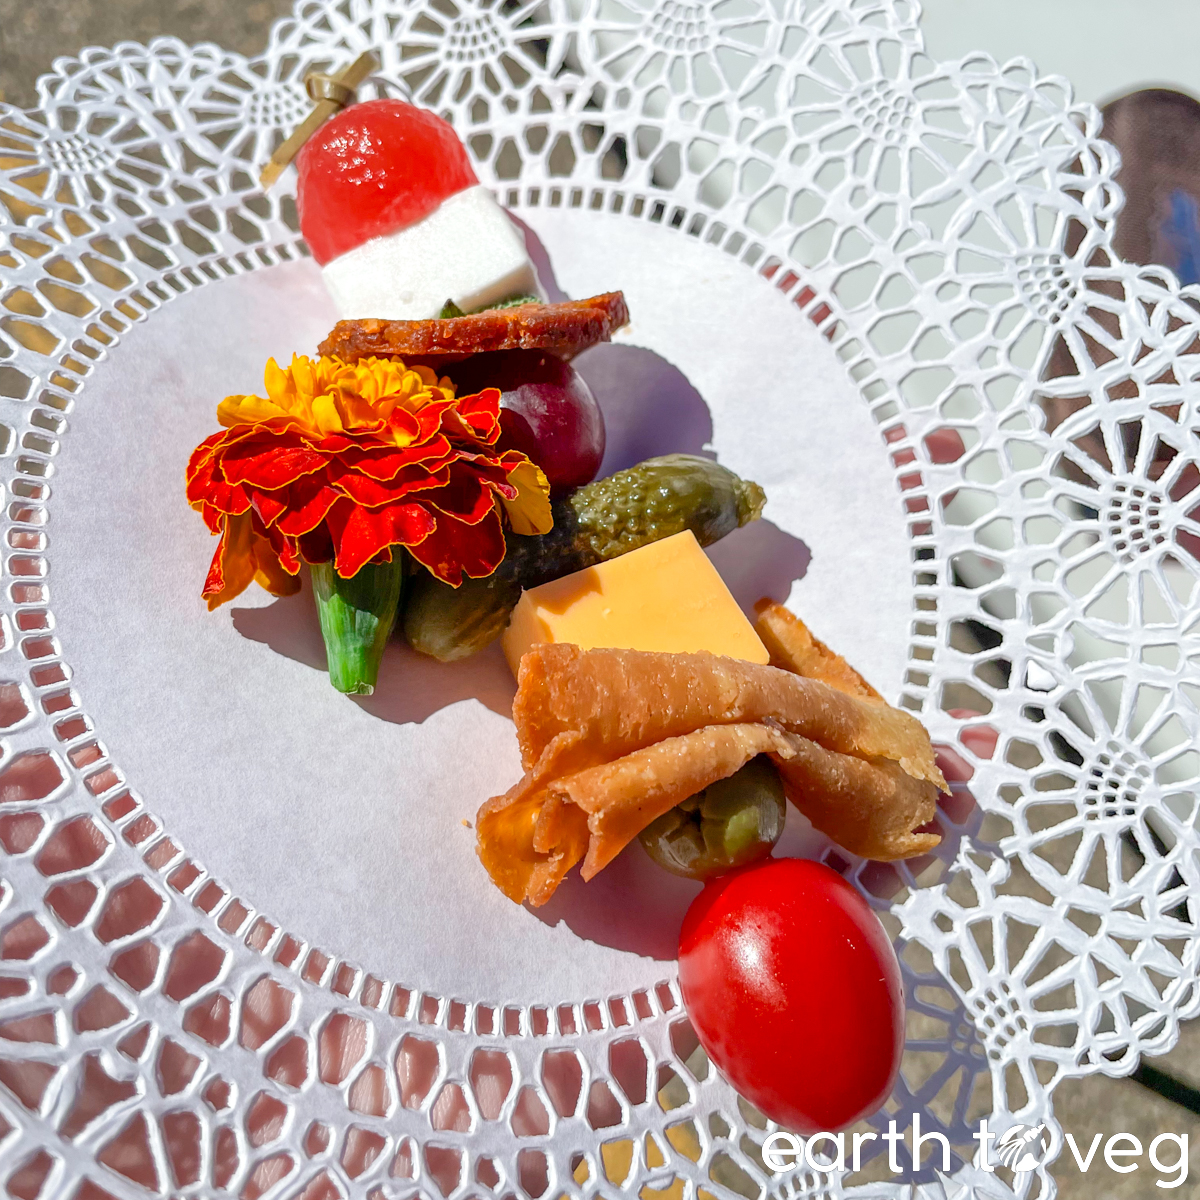 A skewer of vegan cheese, charcuterie, and fresh tomatoes resting on a paper doily.